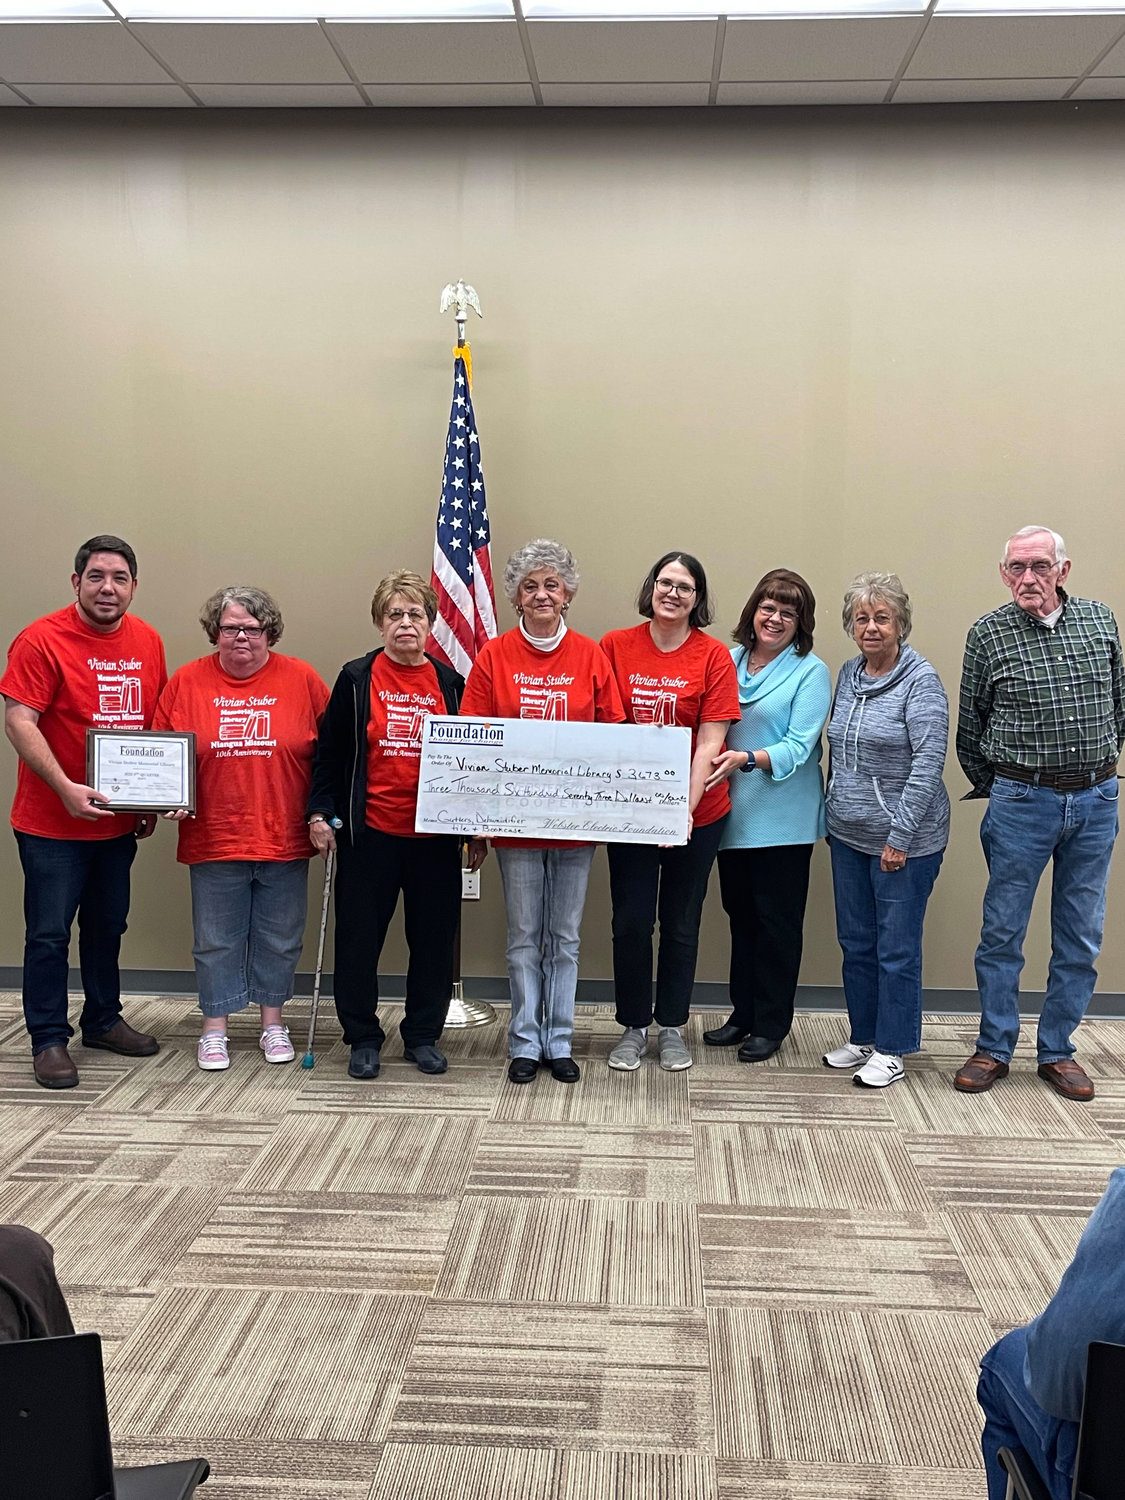 Members of the Vivian Stuber Memorial Library accept a grant in the amount of $3,673. The library has been open in Niangua for 10 years and have plans to purchase gutters for the building, a dehumidifier, new tiling and a book case with the grant funds.